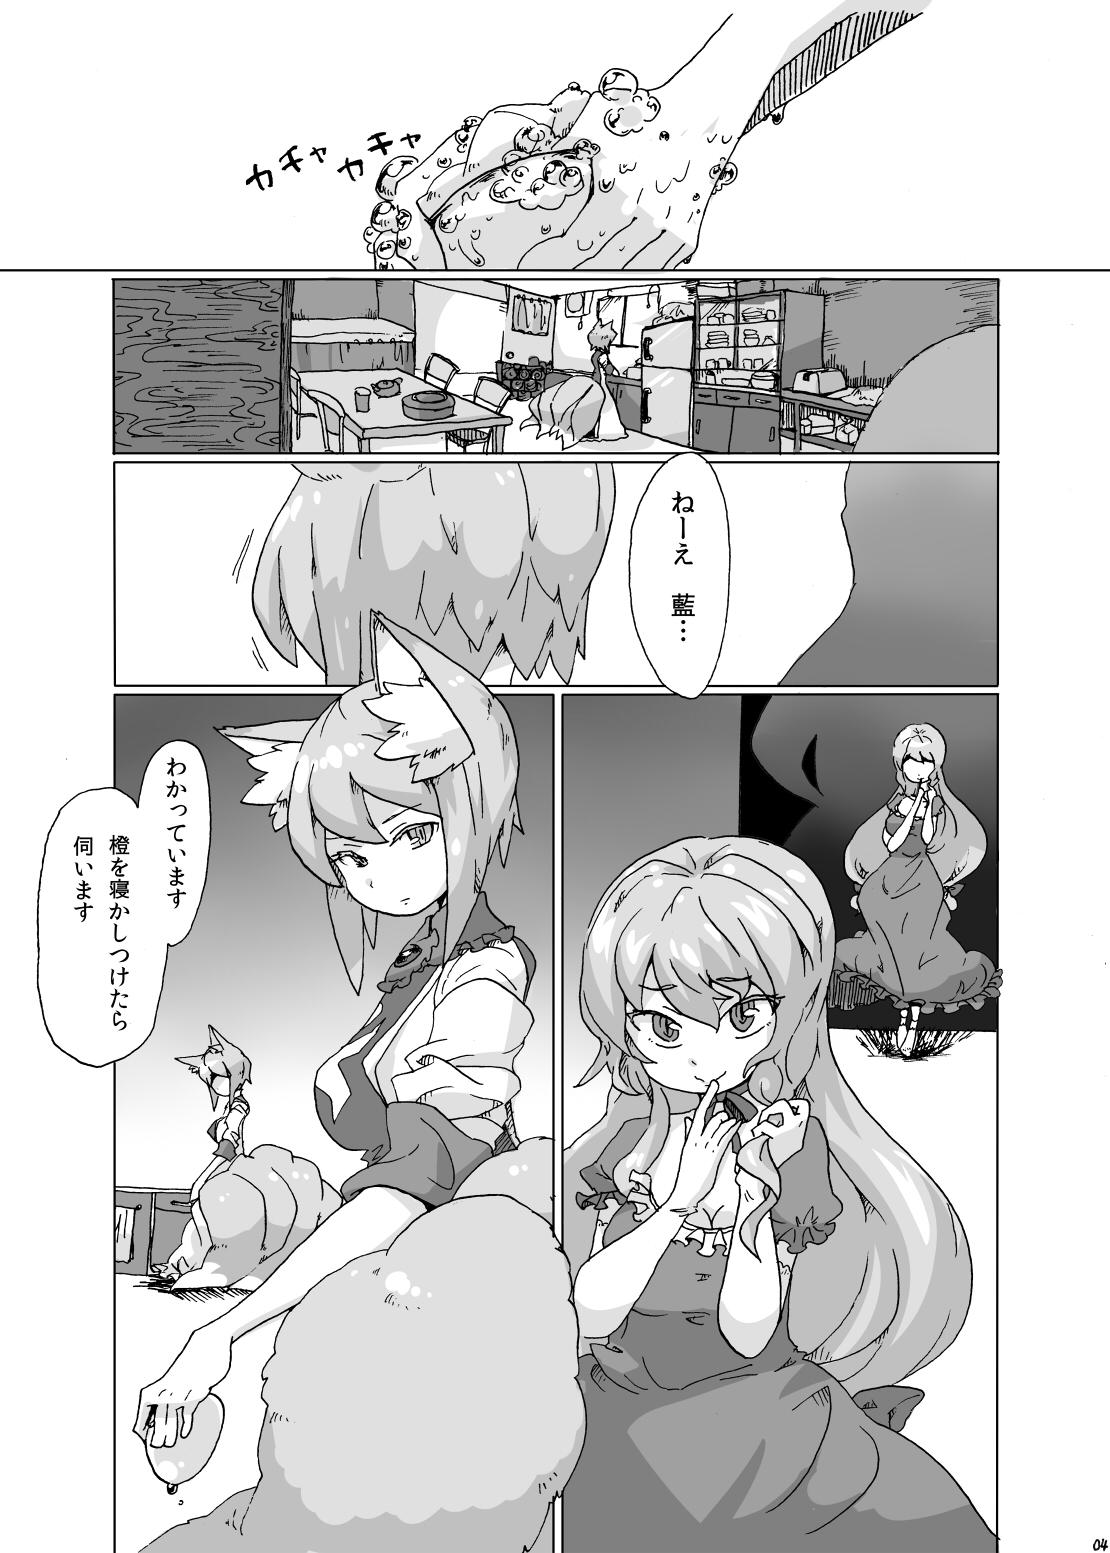 Beautiful 紫さまとわたし - Touhou project Freaky - Page 3